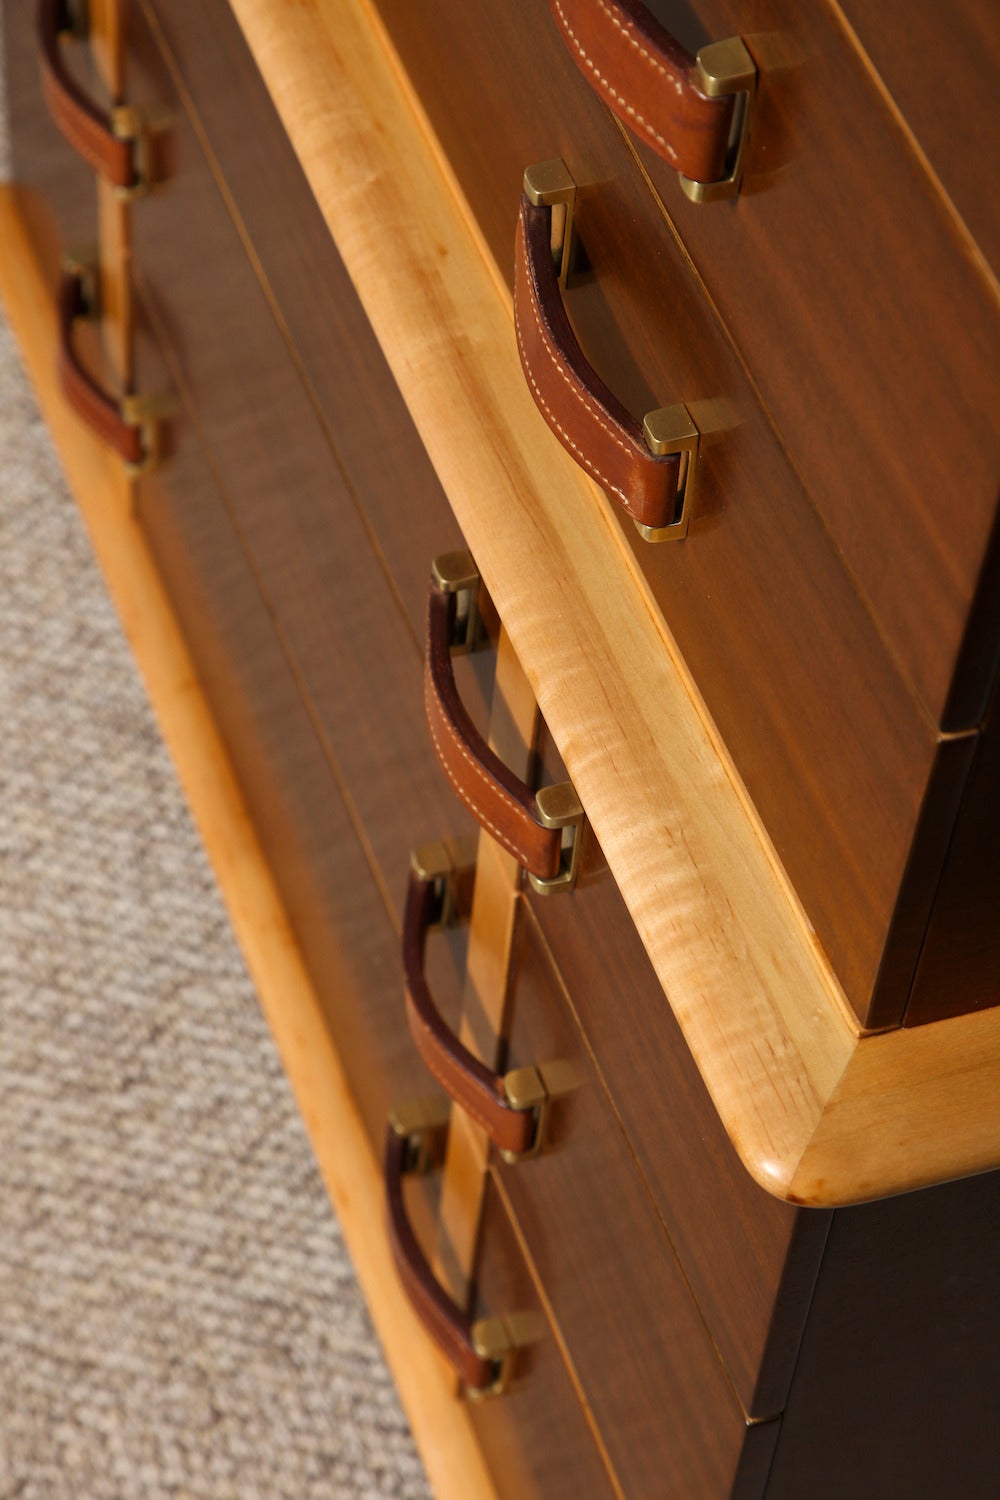 Six-drawer mahogany chest with pearwood trim. Firm leather pulls with top-stitching and brass mounts. A great form from an exceptional series that was produced by Johnson Furniture for a very short time.